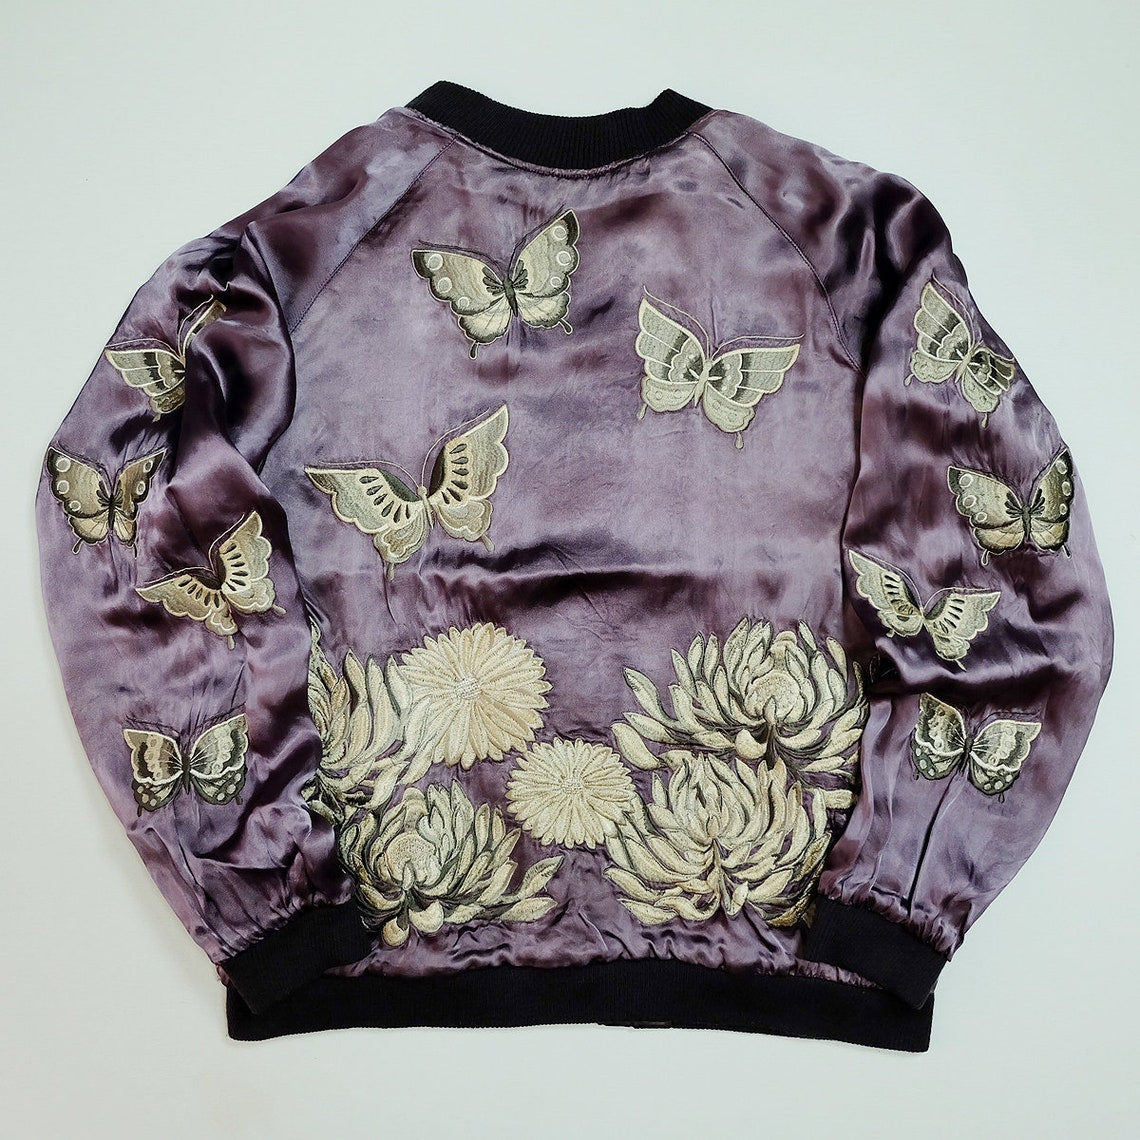 CHIC SEXY RARE VINTAGE JAPANESE JAPAN YOKOSUKA JUMPER GREEN GRAY CHOCHO BUTTERFLIES BUTTERFLY FLOWER FLOWERS FLORAL TATTOO ART EMBROIDERY EMBROIDERED BOMBER SUKAJAN SOUVENIR JACKET TOUR JACKET ( SIZE : L )